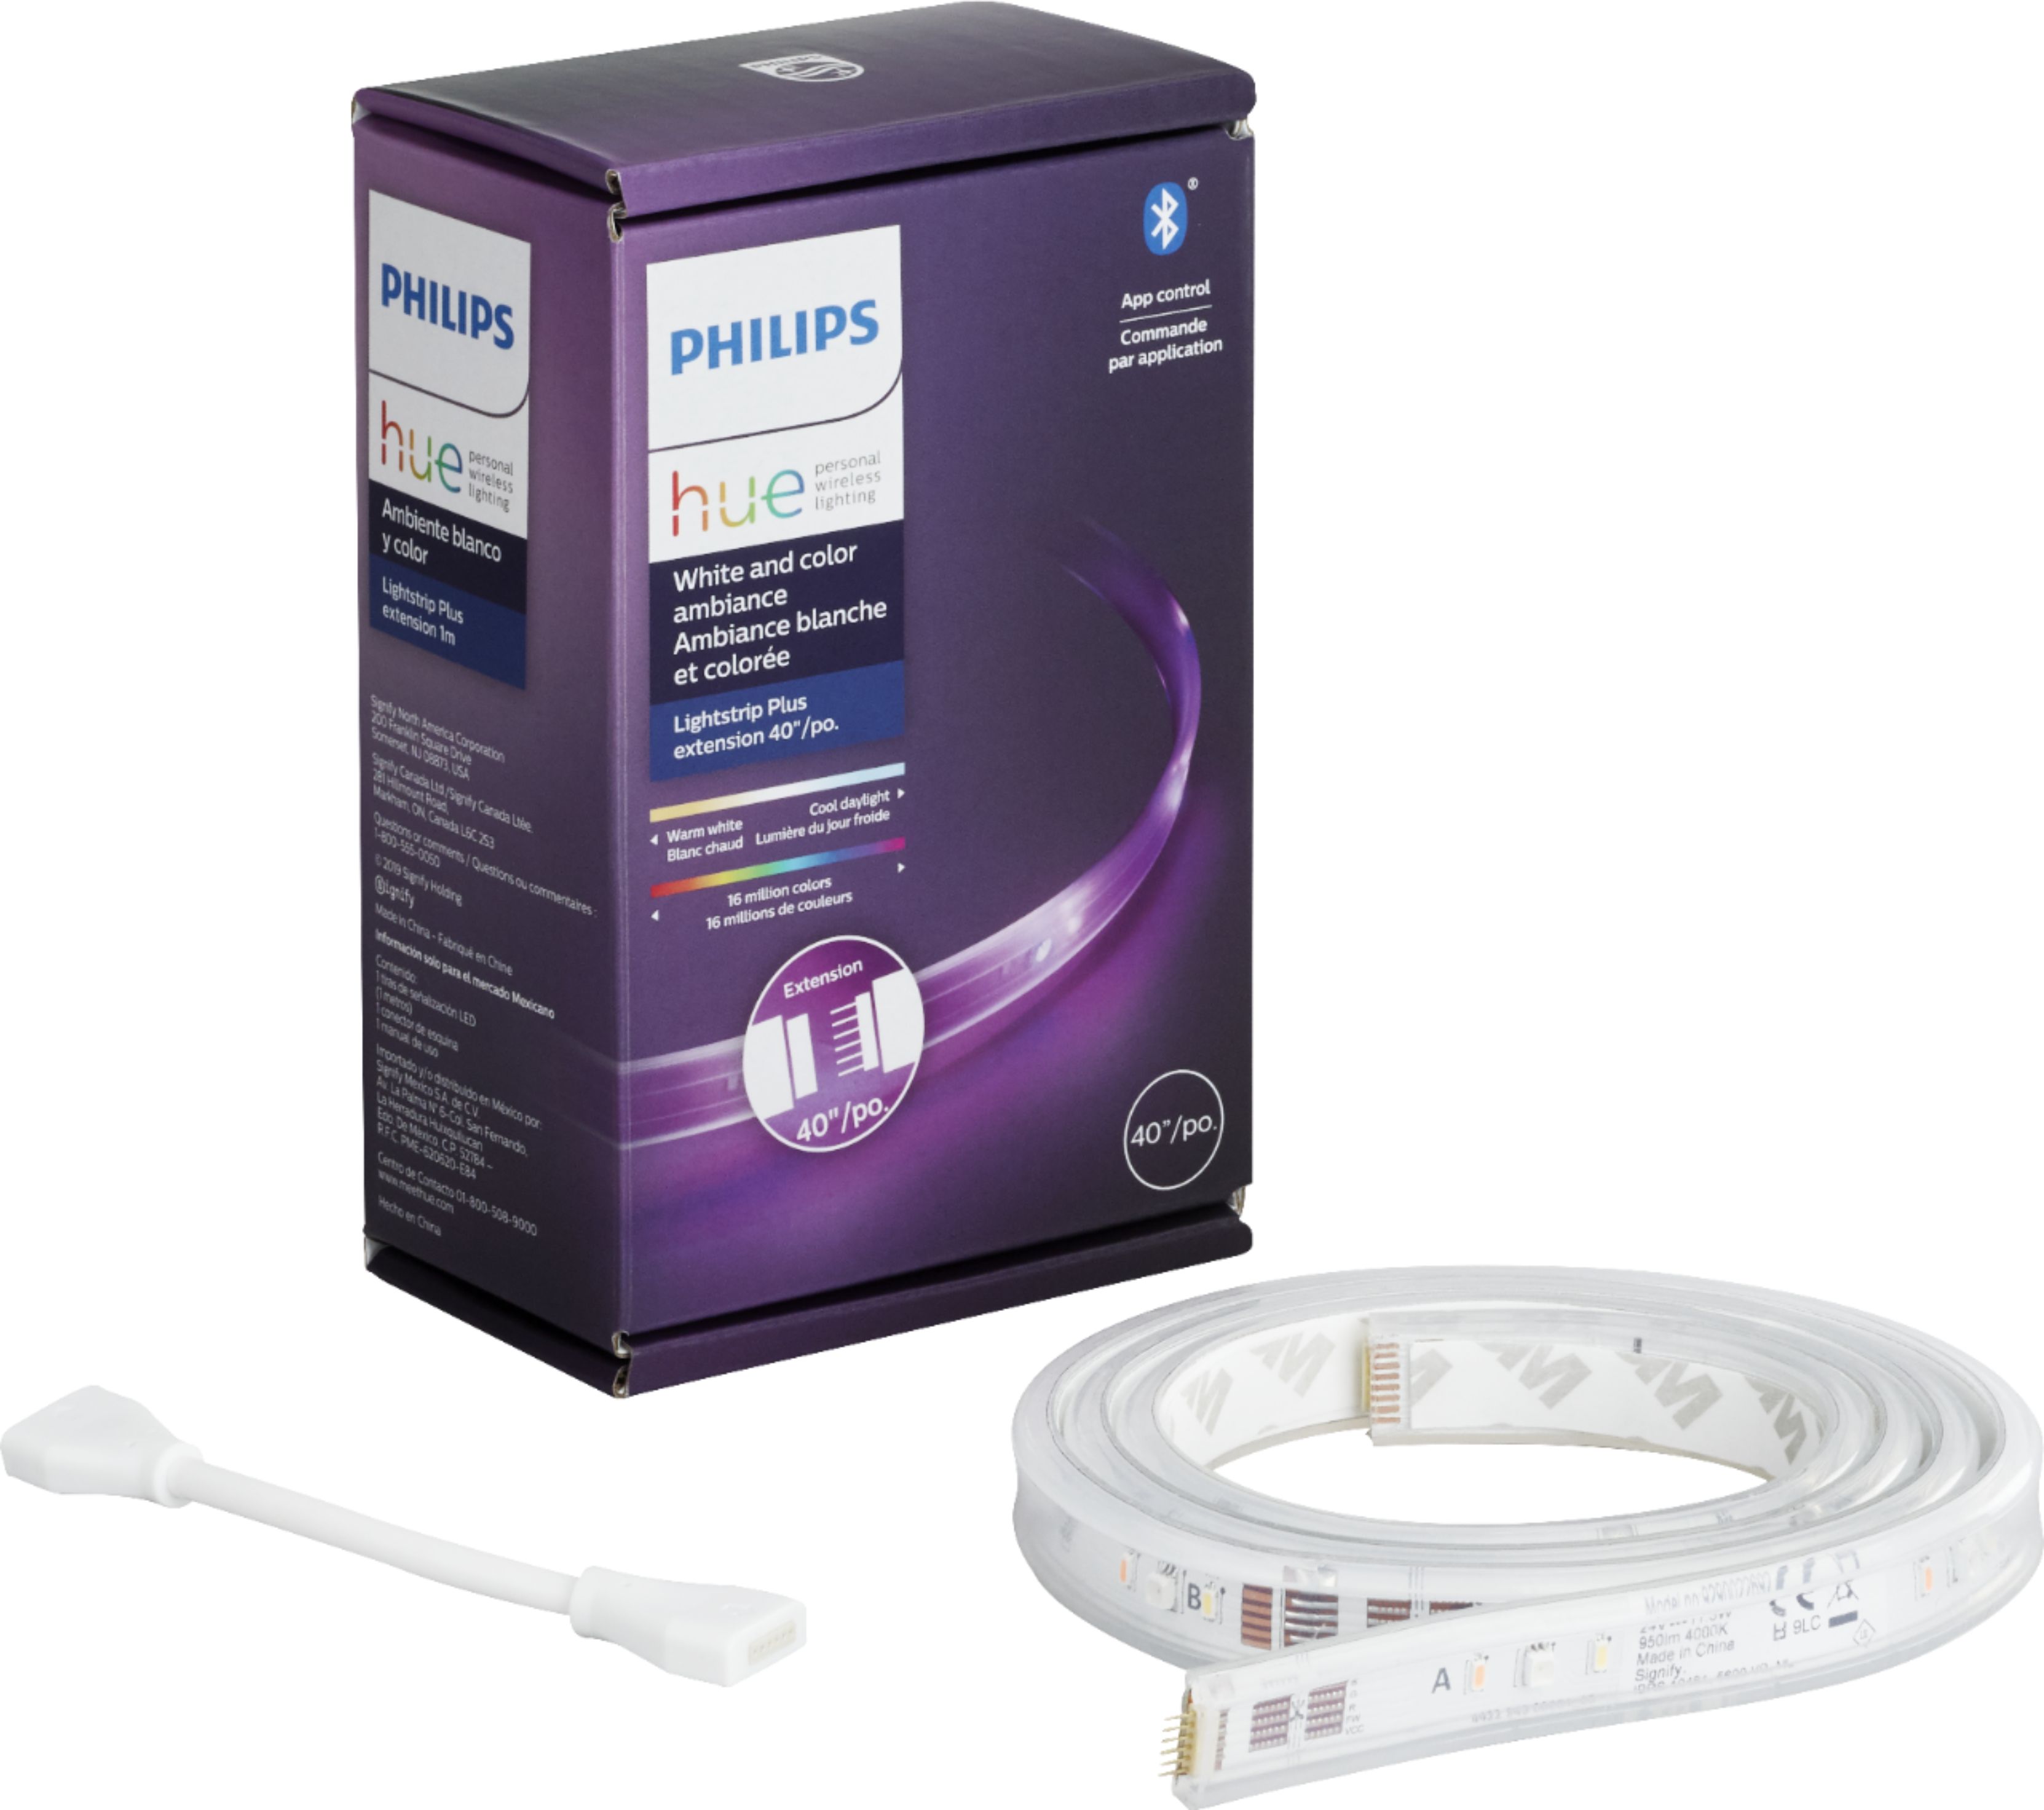 Suri Comorama Goed Philips Geek Squad Certified Refurbished Hue White and Color Ambiance  Lightstrip Plus 1m Extension with Bluetooth GSRF 555326 - Best Buy